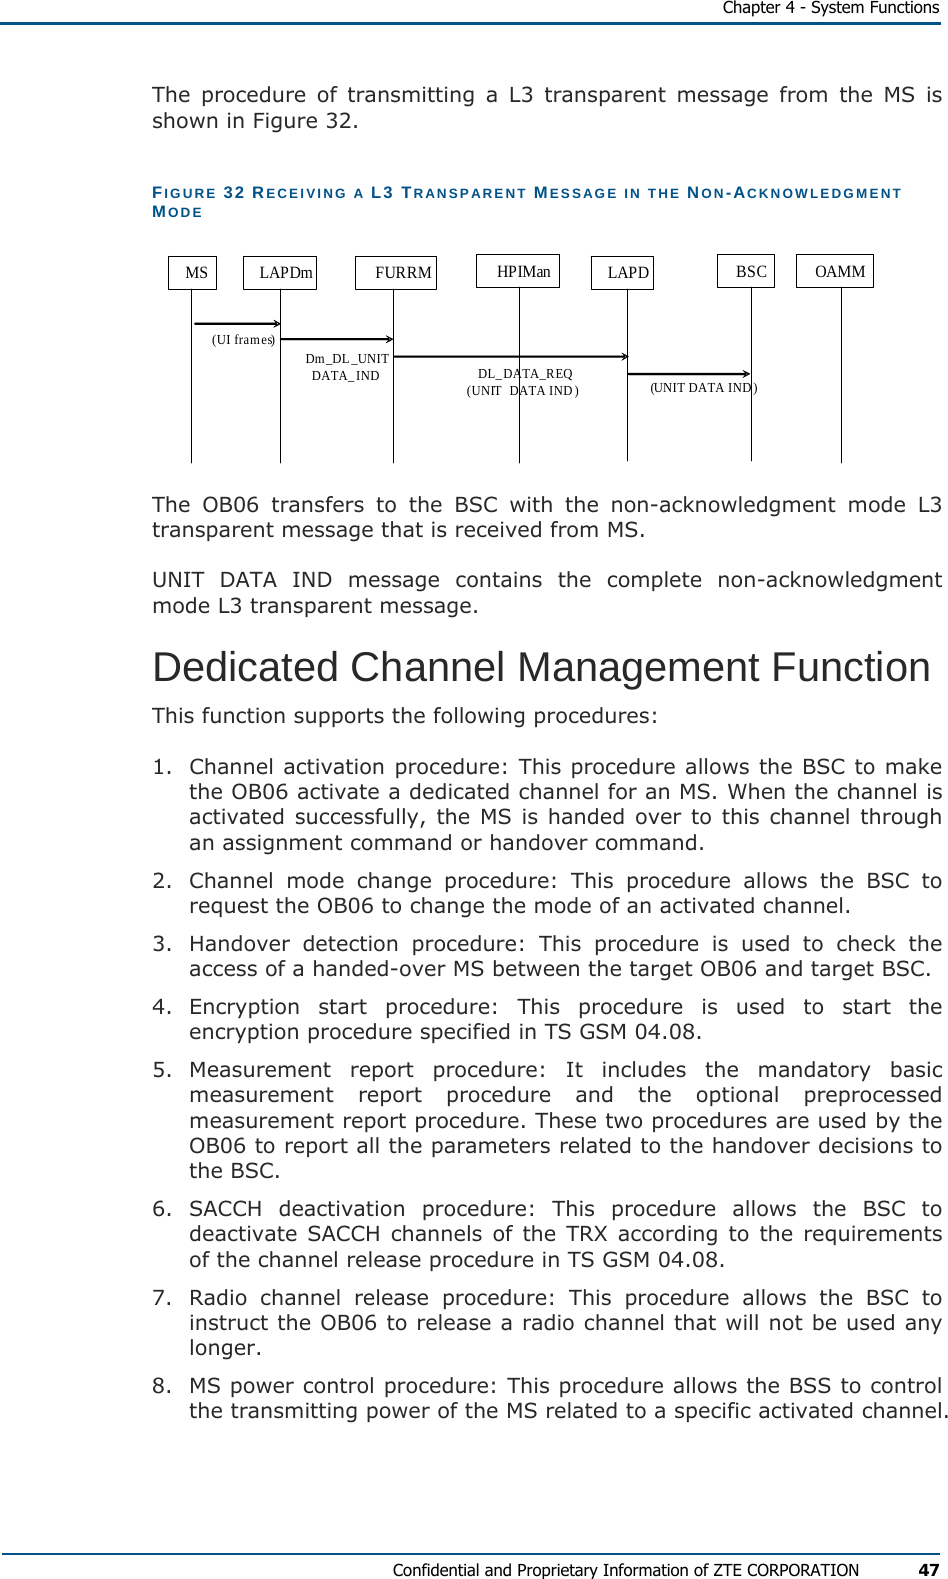   Chapter 4 - System Functions Confidential and Proprietary Information of ZTE CORPORATION 47 The procedure of transmitting a L3 transparent message from the MS is shown in Figure 32. FIGURE 32 RECEIVING A L3 TRANSPARENT MESSAGE IN THE NON-ACKNOWLEDGMENT MODE MS LAPDm FURRM HPIMan LAPD BSC OAMM(UI frames) Dm_DL_UNIT DATA_IND DL_DATA_REQ(UNIT  DATA IND) (UNIT DATA IND)  The OB06 transfers to the BSC with the non-acknowledgment mode L3 transparent message that is received from MS. UNIT DATA IND message contains the complete non-acknowledgment mode L3 transparent message. Dedicated Channel Management Function This function supports the following procedures: 1.  Channel activation procedure: This procedure allows the BSC to make the OB06 activate a dedicated channel for an MS. When the channel is activated successfully, the MS is handed over to this channel through an assignment command or handover command. 2.  Channel mode change procedure: This procedure allows the BSC to request the OB06 to change the mode of an activated channel. 3.  Handover detection procedure: This procedure is used to check the access of a handed-over MS between the target OB06 and target BSC. 4. Encryption start procedure: This procedure is used to start the encryption procedure specified in TS GSM 04.08. 5. Measurement report procedure:  It includes the mandatory basic measurement report procedure and the optional preprocessed measurement report procedure. These two procedures are used by the OB06 to report all the parameters related to the handover decisions to the BSC. 6. SACCH deactivation procedure: This procedure allows the BSC to deactivate SACCH channels of the TRX according to the requirements of the channel release procedure in TS GSM 04.08. 7.  Radio channel release procedure: This procedure allows the BSC to instruct the OB06 to release a radio channel that will not be used any longer. 8.  MS power control procedure: This procedure allows the BSS to control the transmitting power of the MS related to a specific activated channel. 